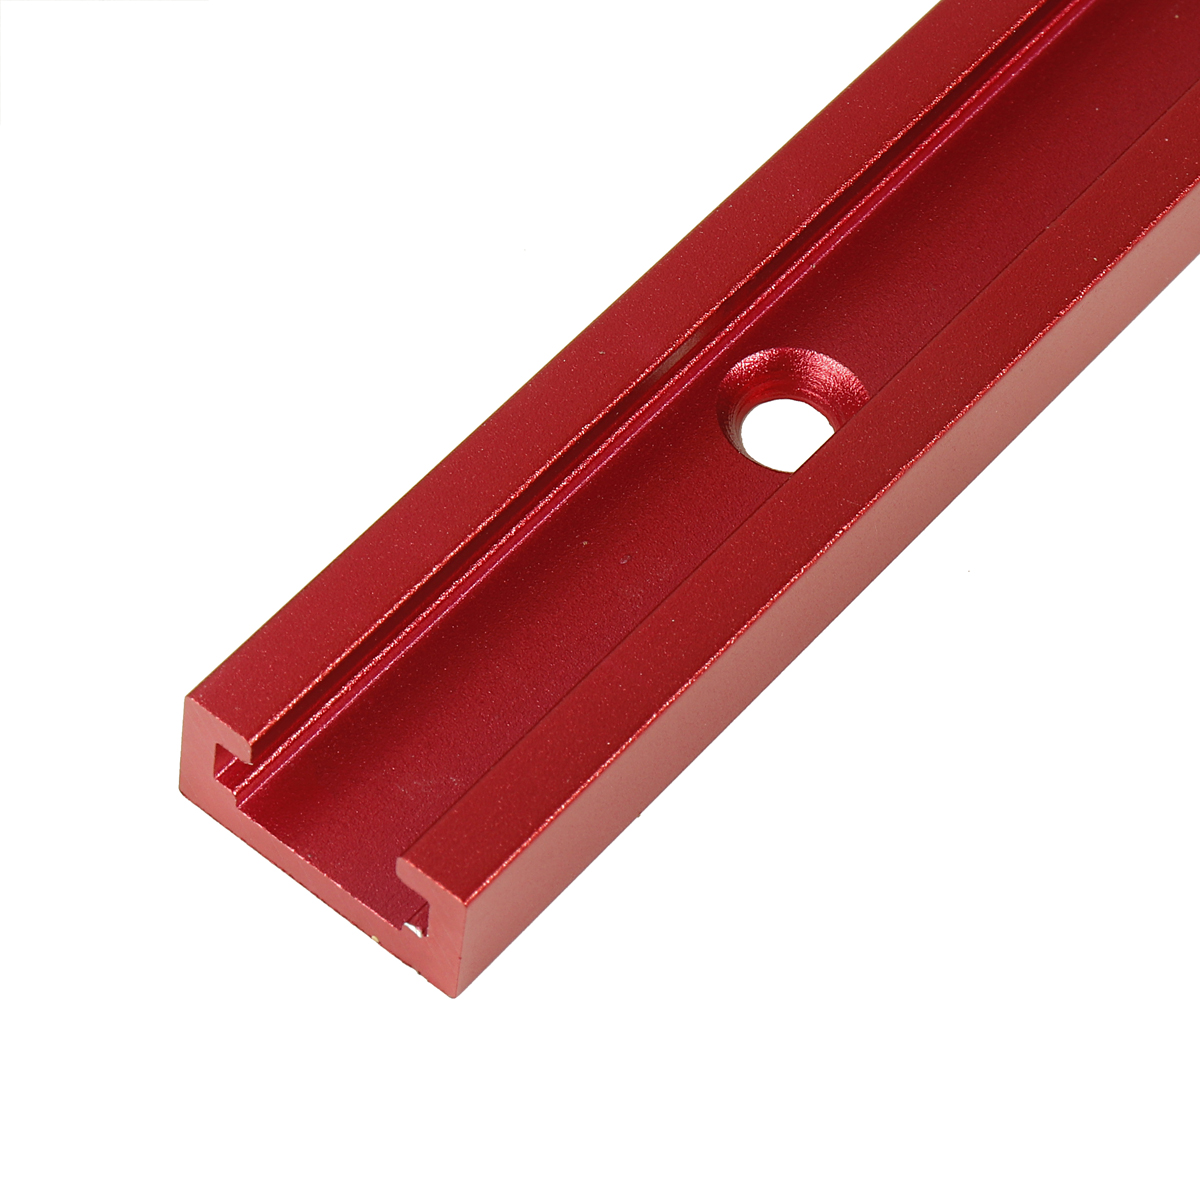 Red-Aluminum-Alloy-300-1220mm-T-track-T-slot-Miter-Track-Jig-T-Screw-Fixture-Slot-19x95mm-For-Table--1682608-7